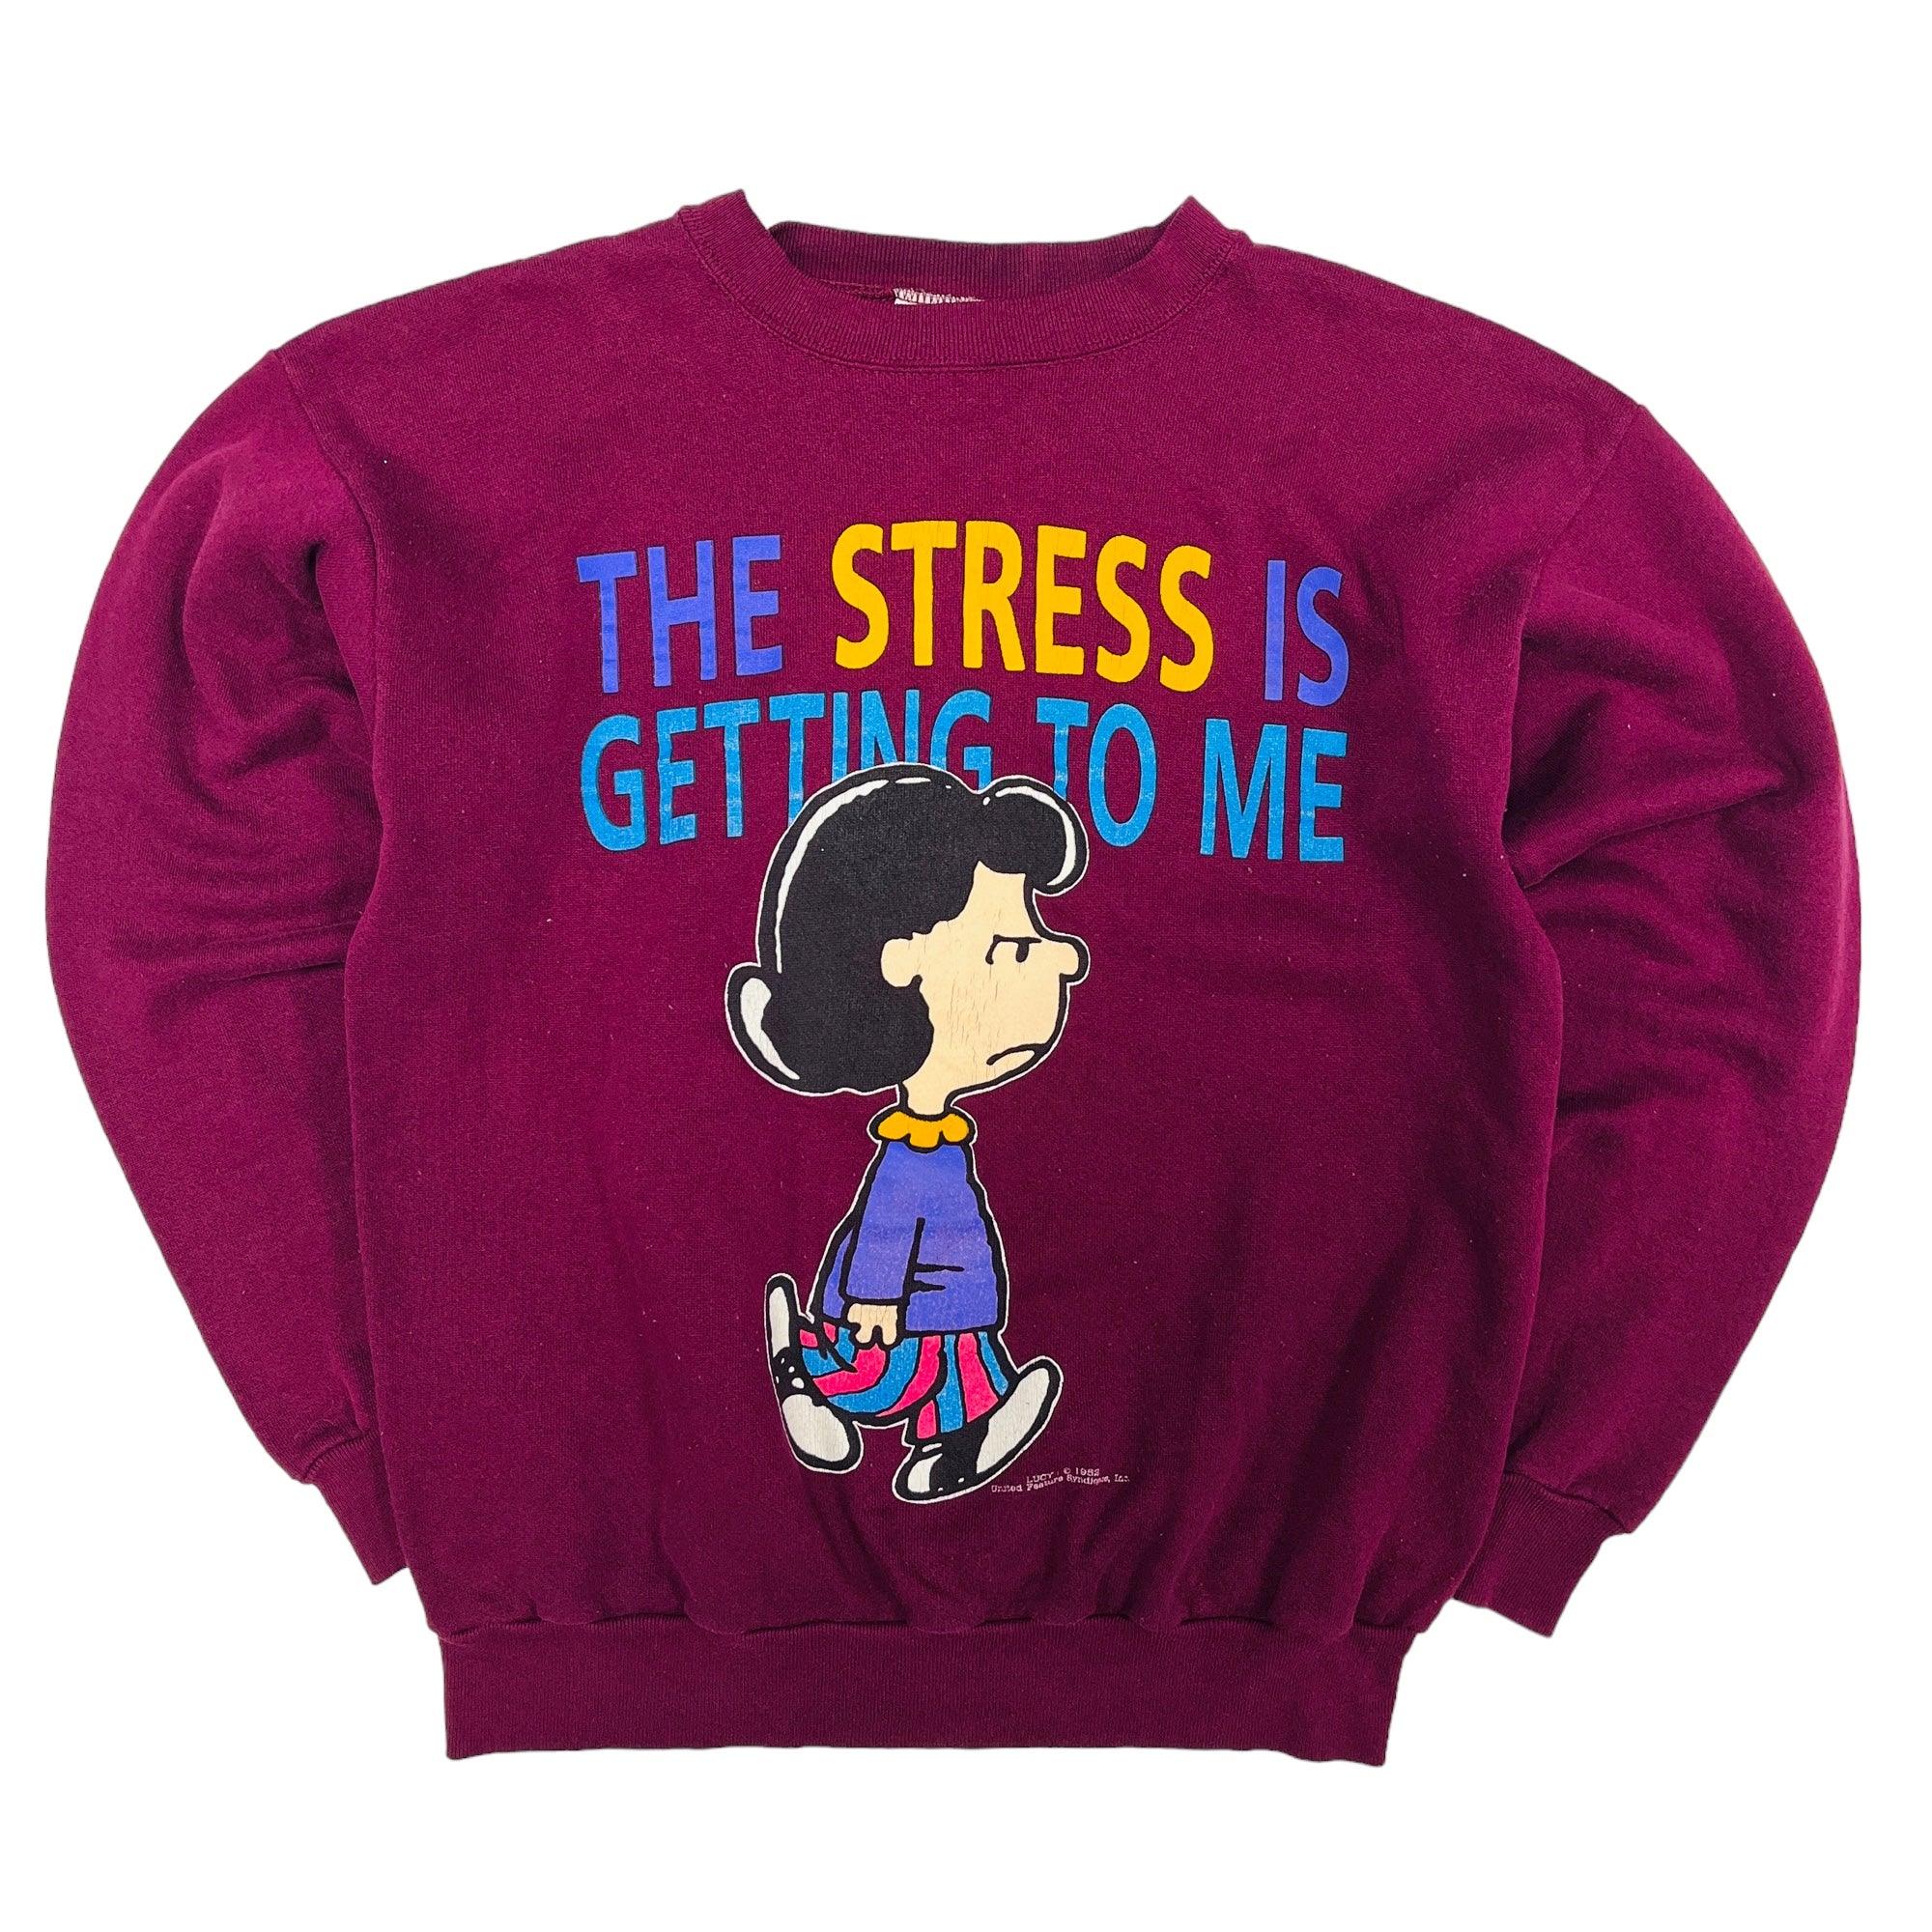 90's Peanuts "The Stress Is Getting To Me" Graphic Sweatshirt - Large